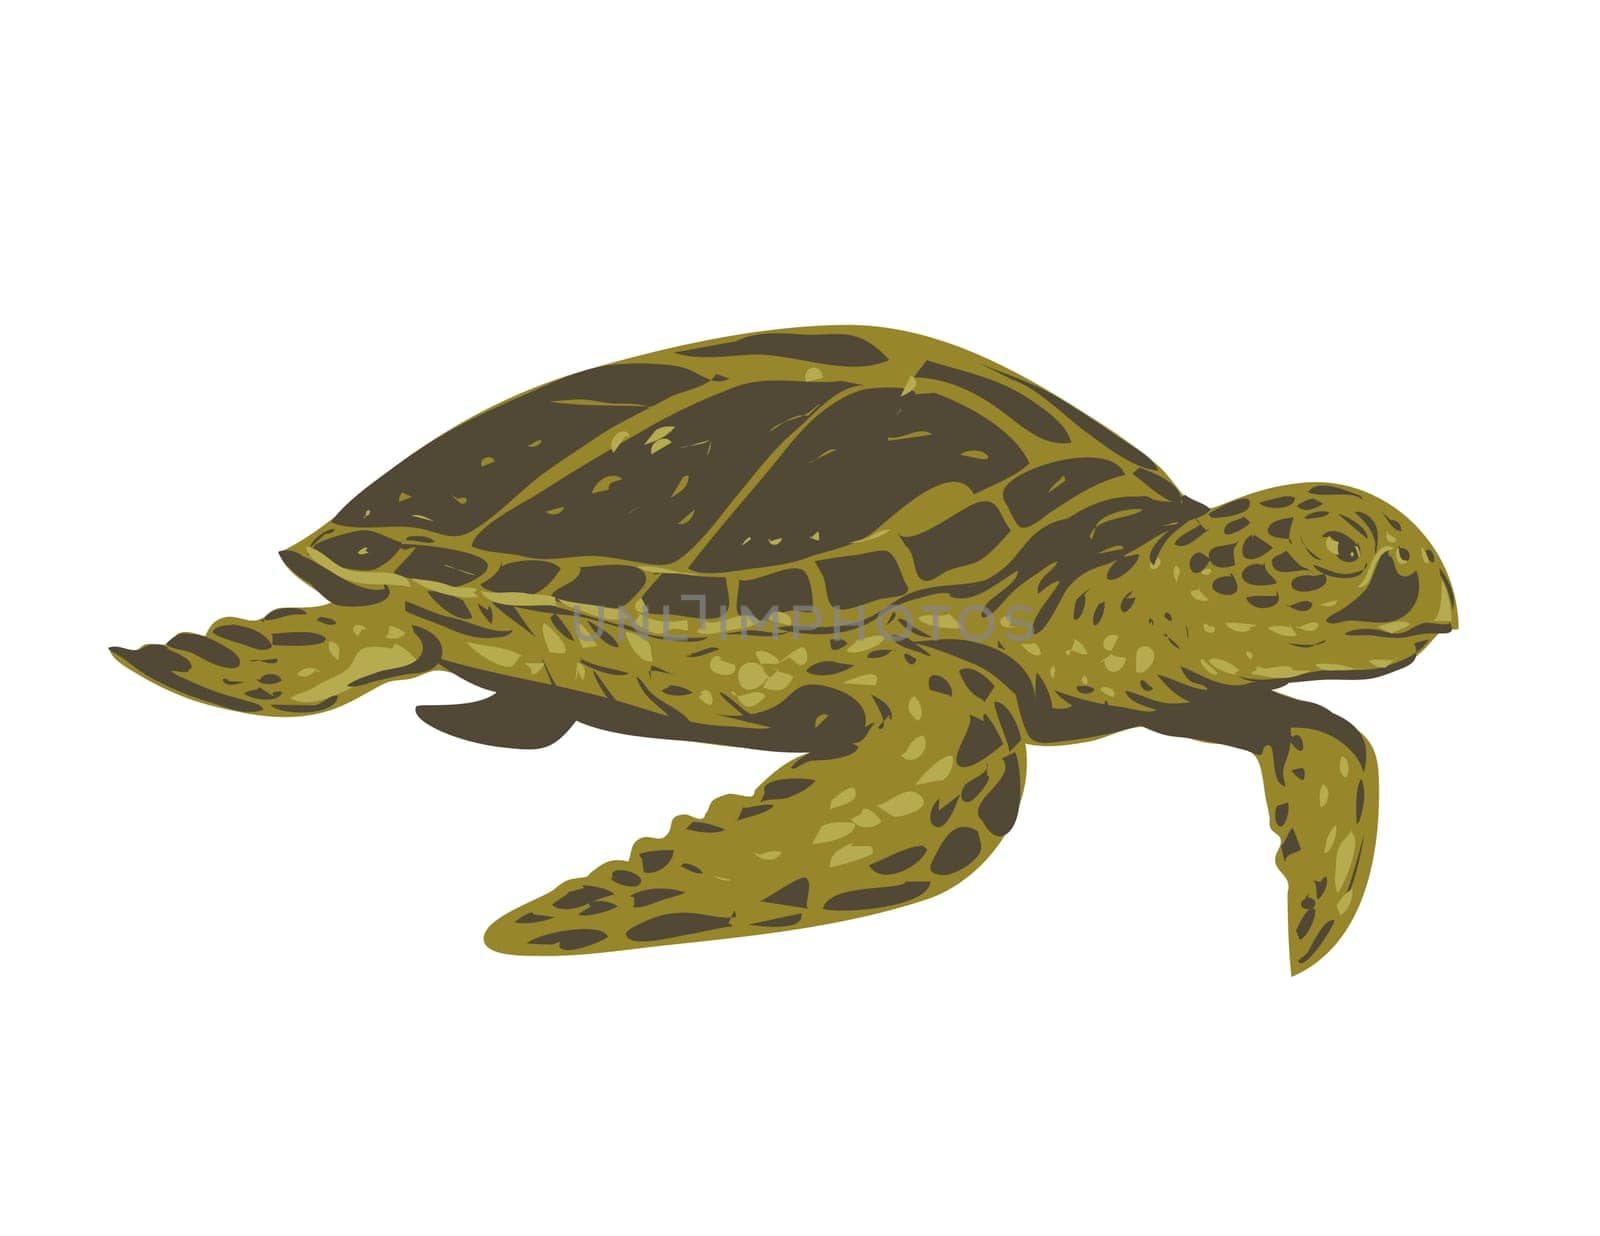 WPA poster art of a green sea turtle, also known as the green turtle, black turtle or Pacific green turtle swimming viewed from side done in works project administration or federal art project style.
